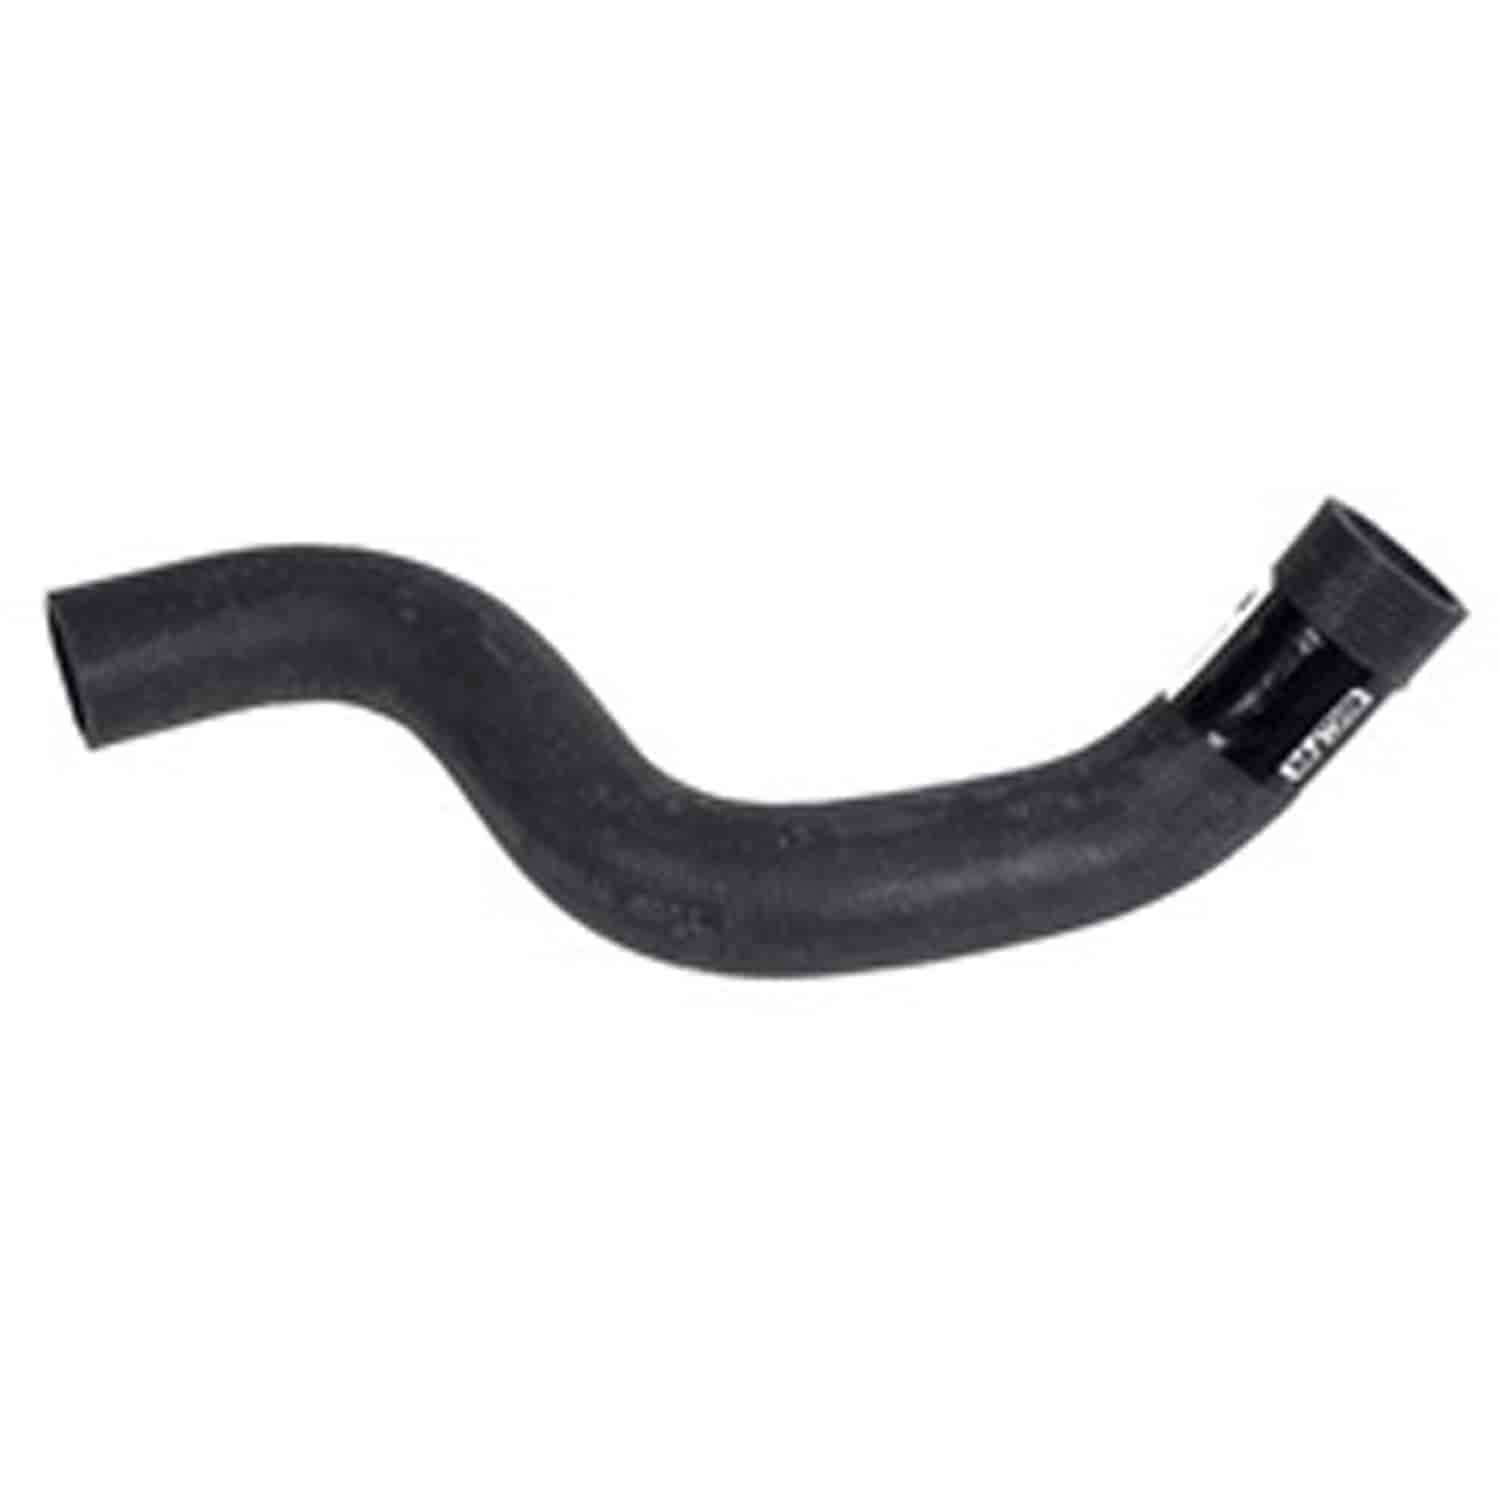 This lower radiator hose from Omix-ADA fits the 3.8L engine in 07-11 Jeep Wrangler.